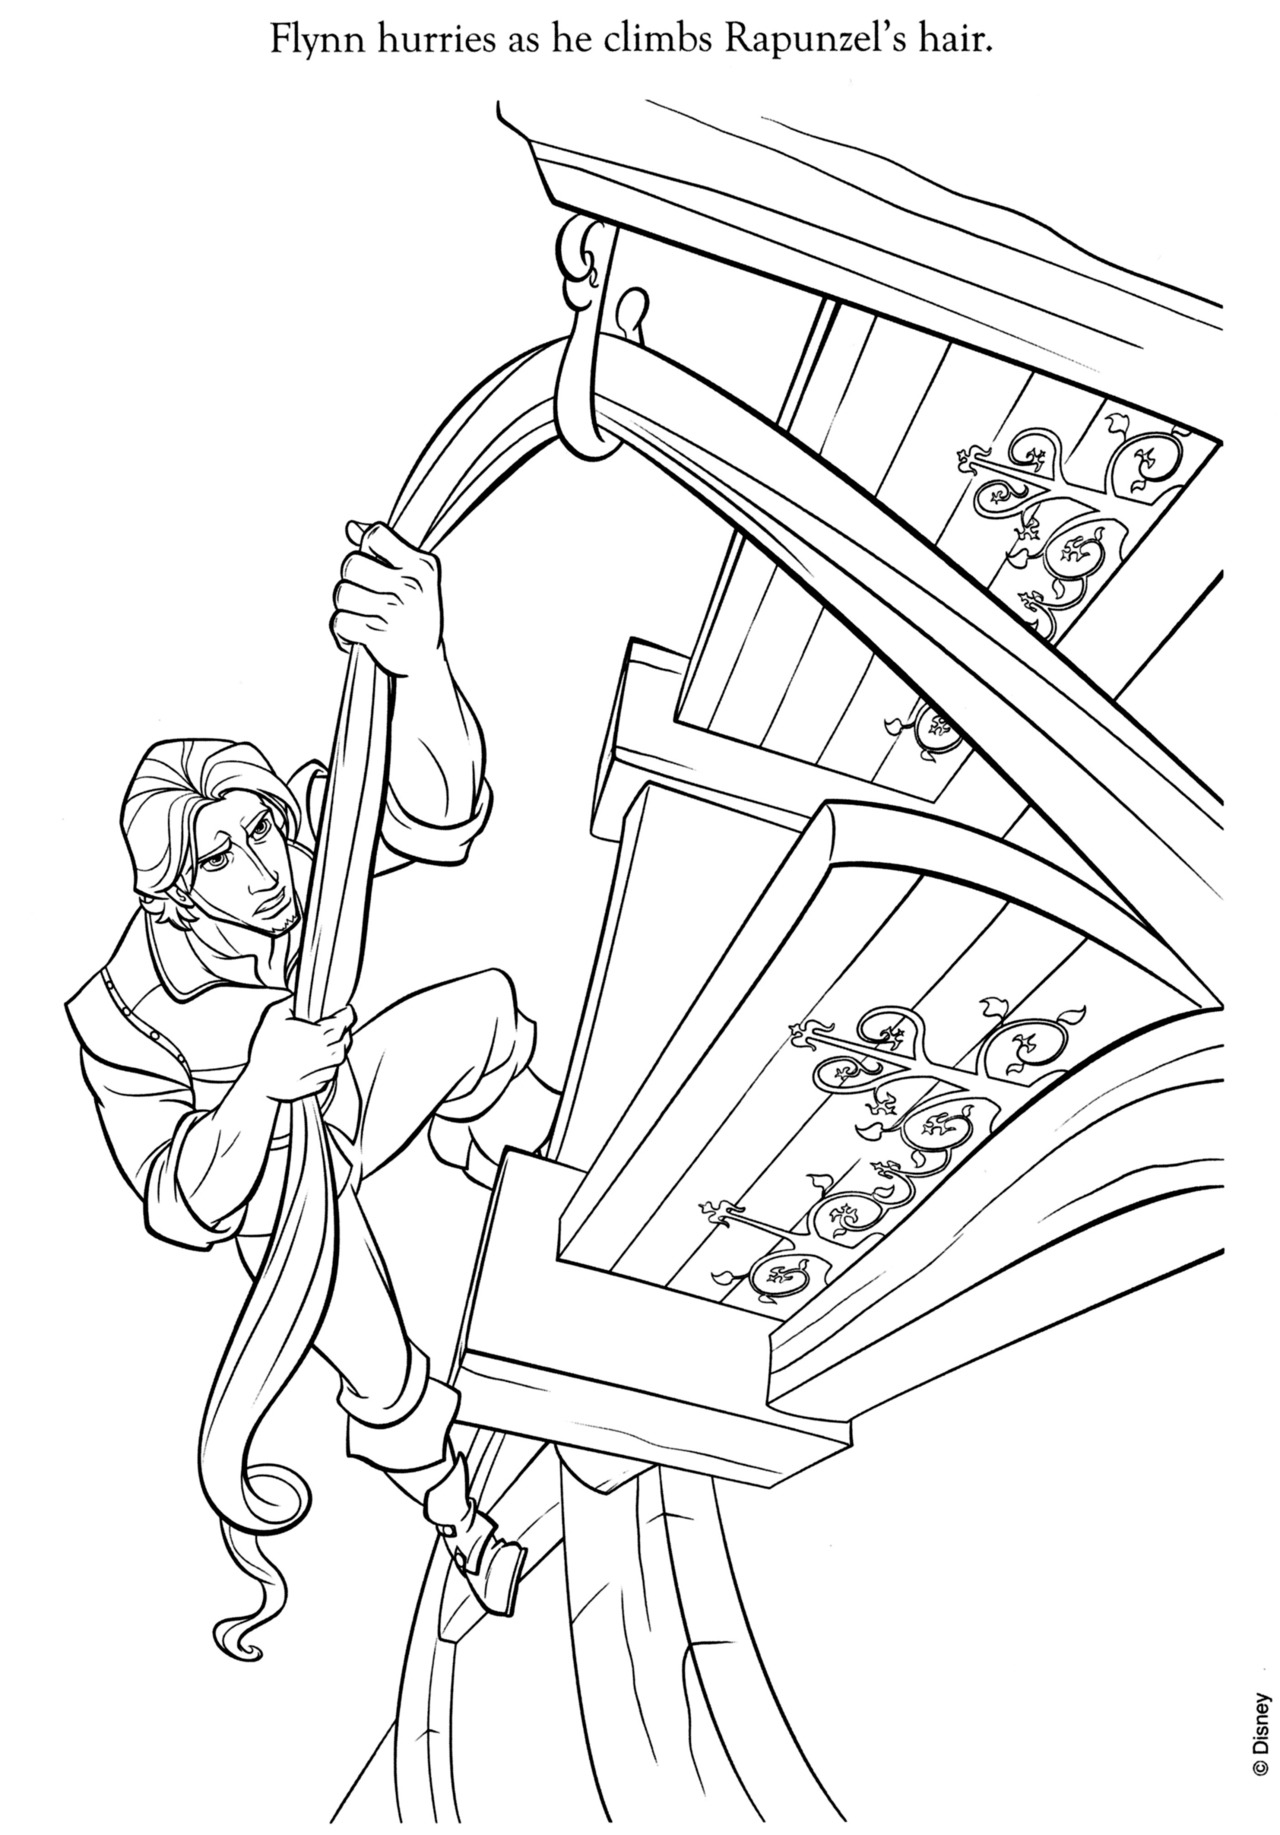 The Art of Tangled • The Tower Scene in Coloring Pages Links to larger...